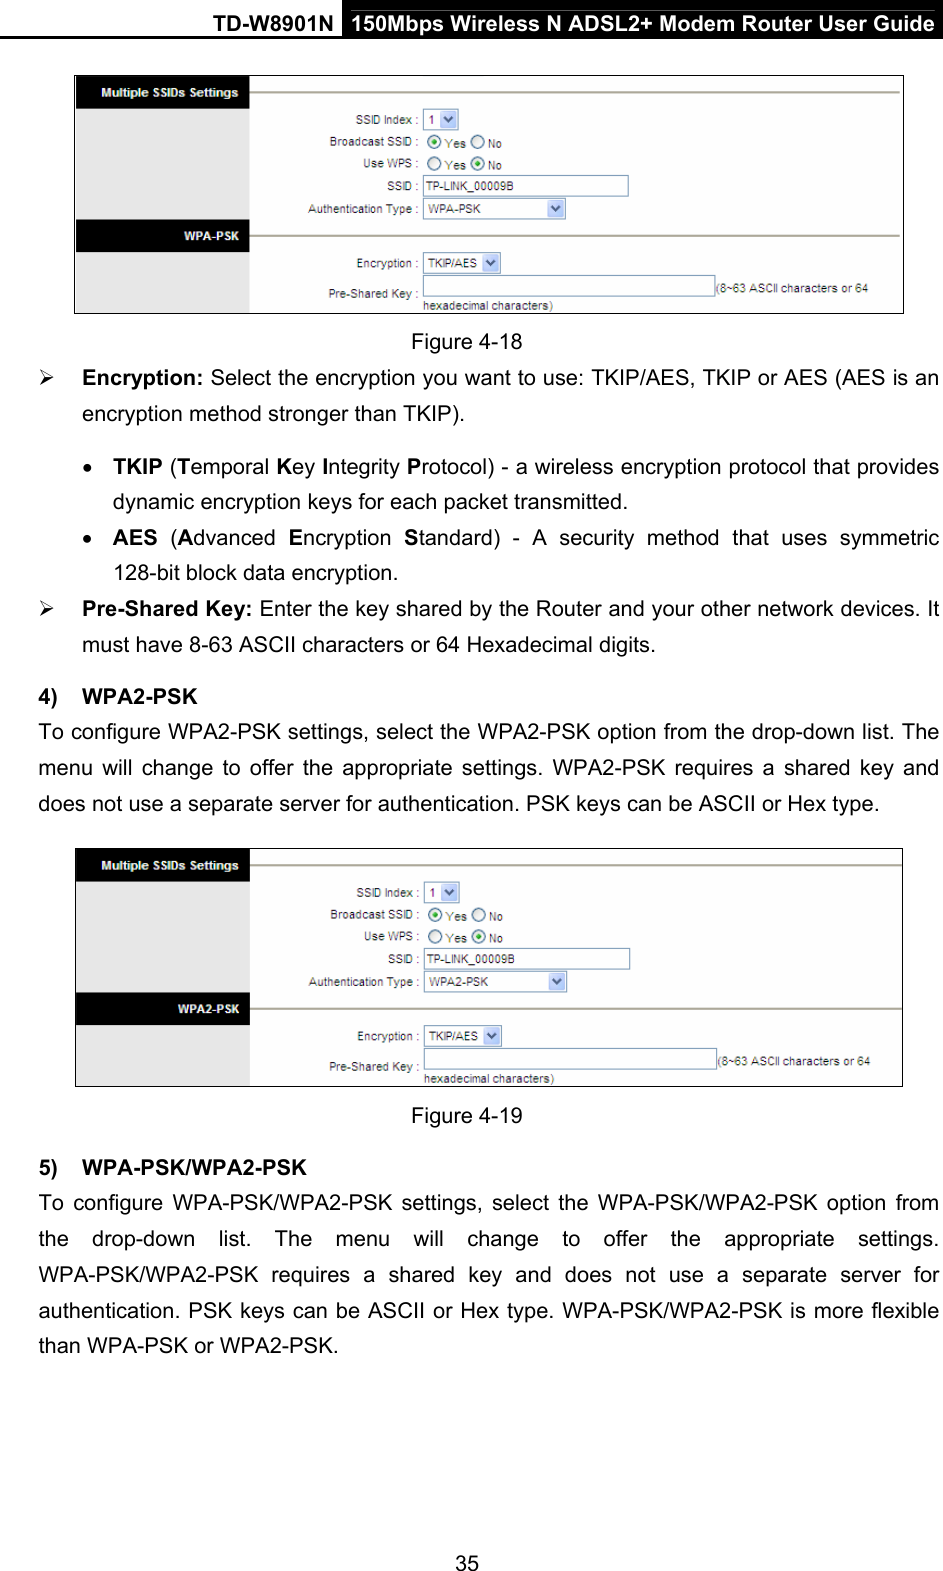 TD-W8901N  150Mbps Wireless N ADSL2+ Modem Router User Guide 35  Figure 4-18  Encryption: Select the encryption you want to use: TKIP/AES, TKIP or AES (AES is an encryption method stronger than TKIP).  TKIP (Temporal Key Integrity Protocol) - a wireless encryption protocol that provides dynamic encryption keys for each packet transmitted.  AES (Advanced  Encryption  Standard) - A security method that uses symmetric 128-bit block data encryption.  Pre-Shared Key: Enter the key shared by the Router and your other network devices. It must have 8-63 ASCII characters or 64 Hexadecimal digits. 4) WPA2-PSK To configure WPA2-PSK settings, select the WPA2-PSK option from the drop-down list. The menu will change to offer the appropriate settings. WPA2-PSK requires a shared key and does not use a separate server for authentication. PSK keys can be ASCII or Hex type.  Figure 4-19 5) WPA-PSK/WPA2-PSK To configure WPA-PSK/WPA2-PSK settings, select the WPA-PSK/WPA2-PSK option from the drop-down list. The menu will change to offer the appropriate settings. WPA-PSK/WPA2-PSK requires a shared key and does not use a separate server for authentication. PSK keys can be ASCII or Hex type. WPA-PSK/WPA2-PSK is more flexible than WPA-PSK or WPA2-PSK. 